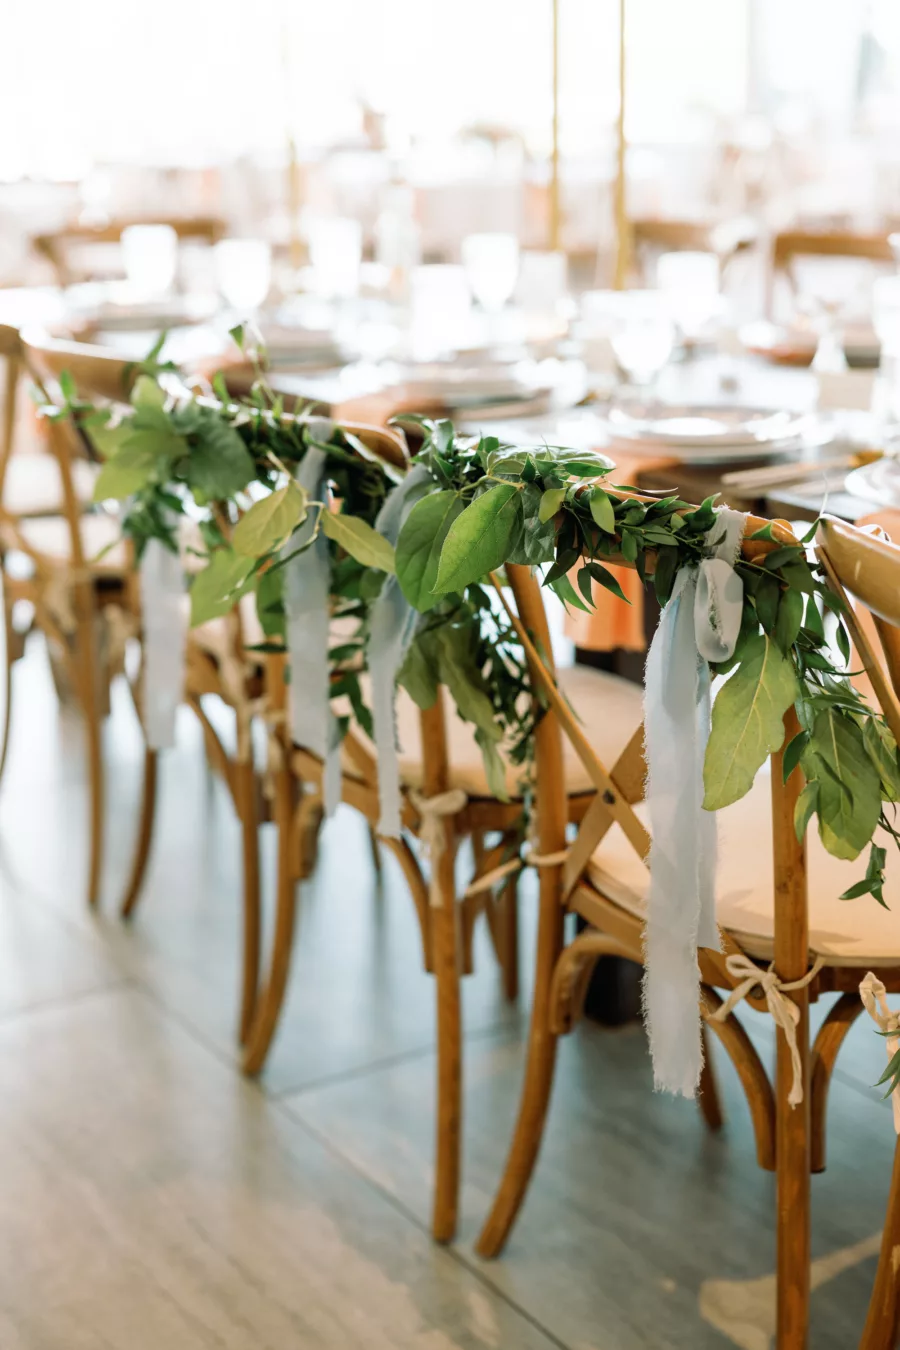 Wooden Crossback Chairs with Greenery Decor for Romantic Spring Pastel Wedding Reception